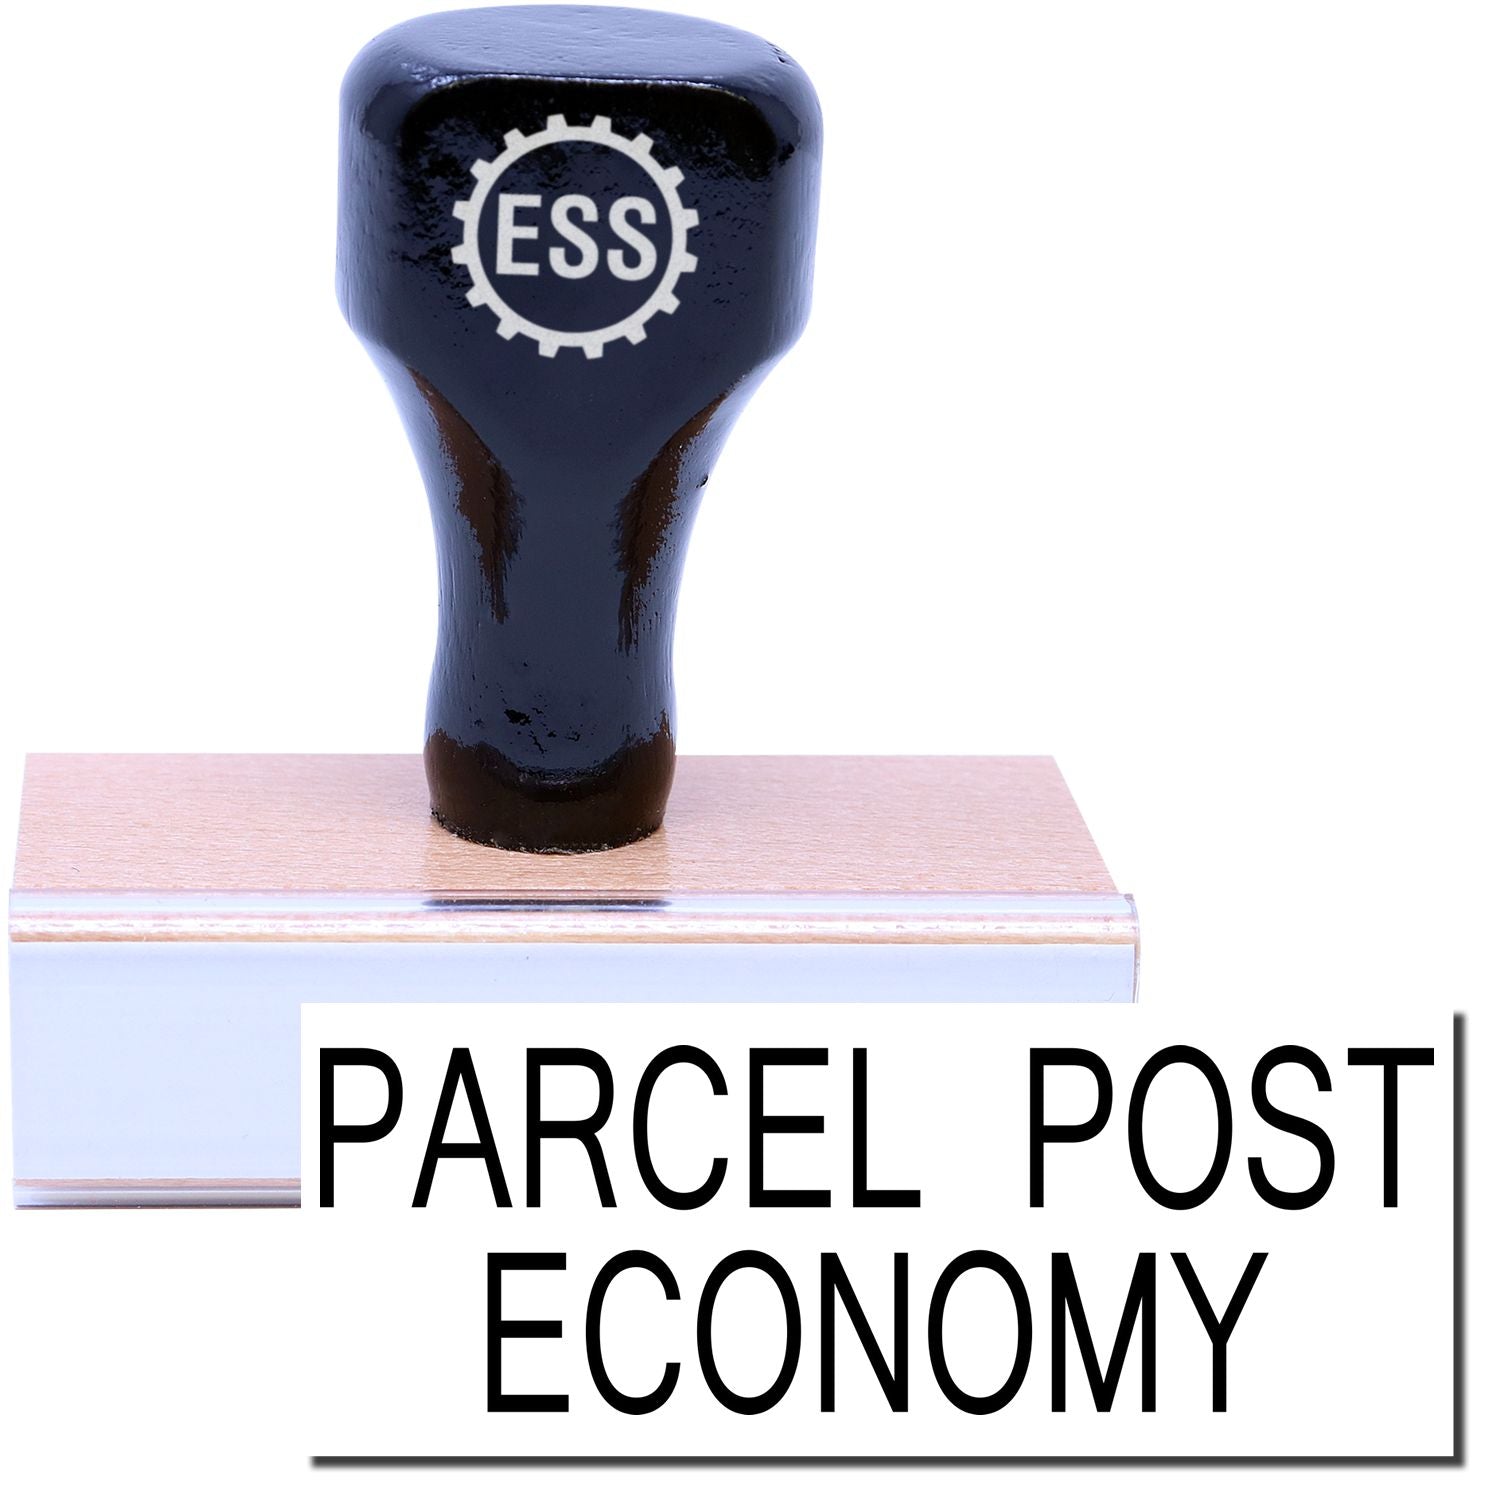 A stock office rubber stamp with a stamped image showing how the text "PARCEL POST ECONOMY" in a large font is displayed after stamping.